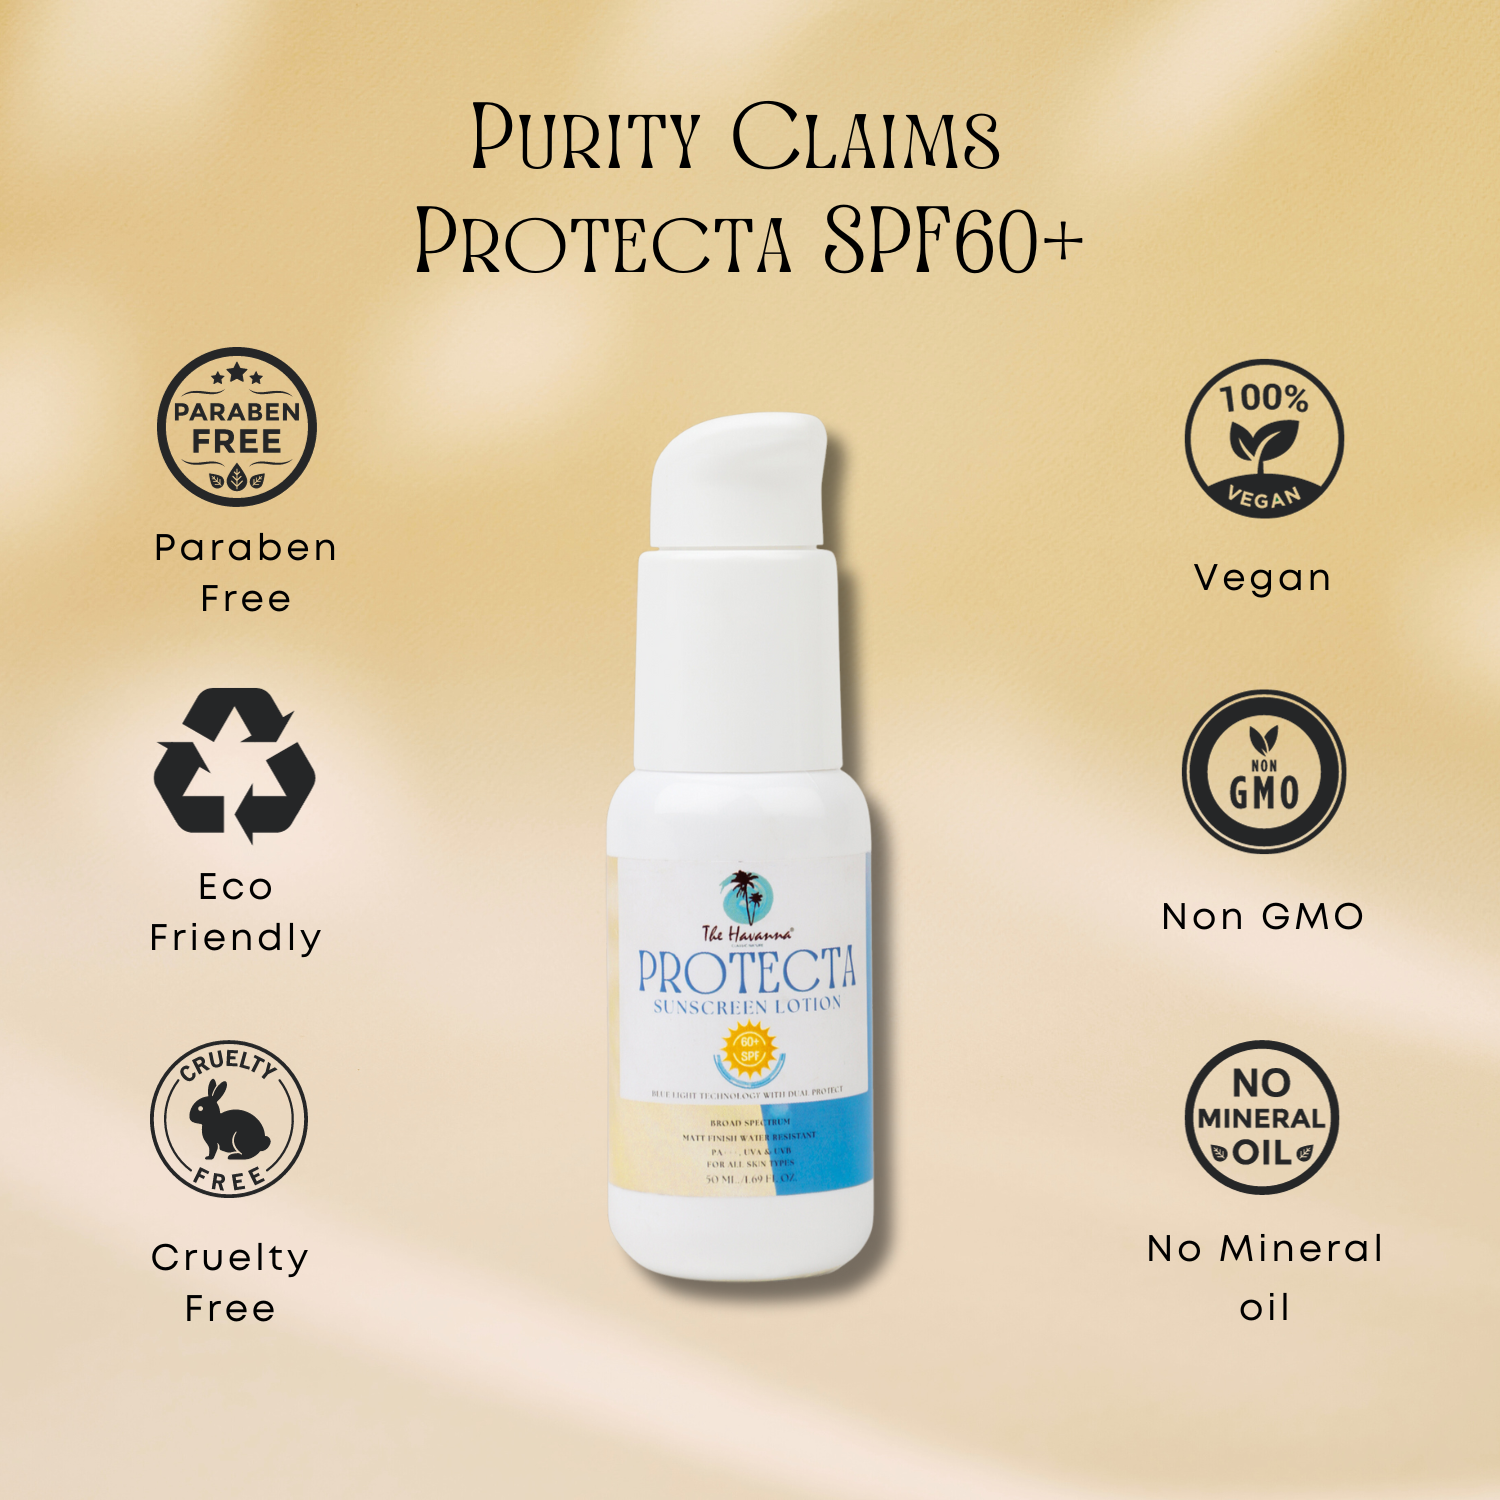 purity claims protecta SPF 60+